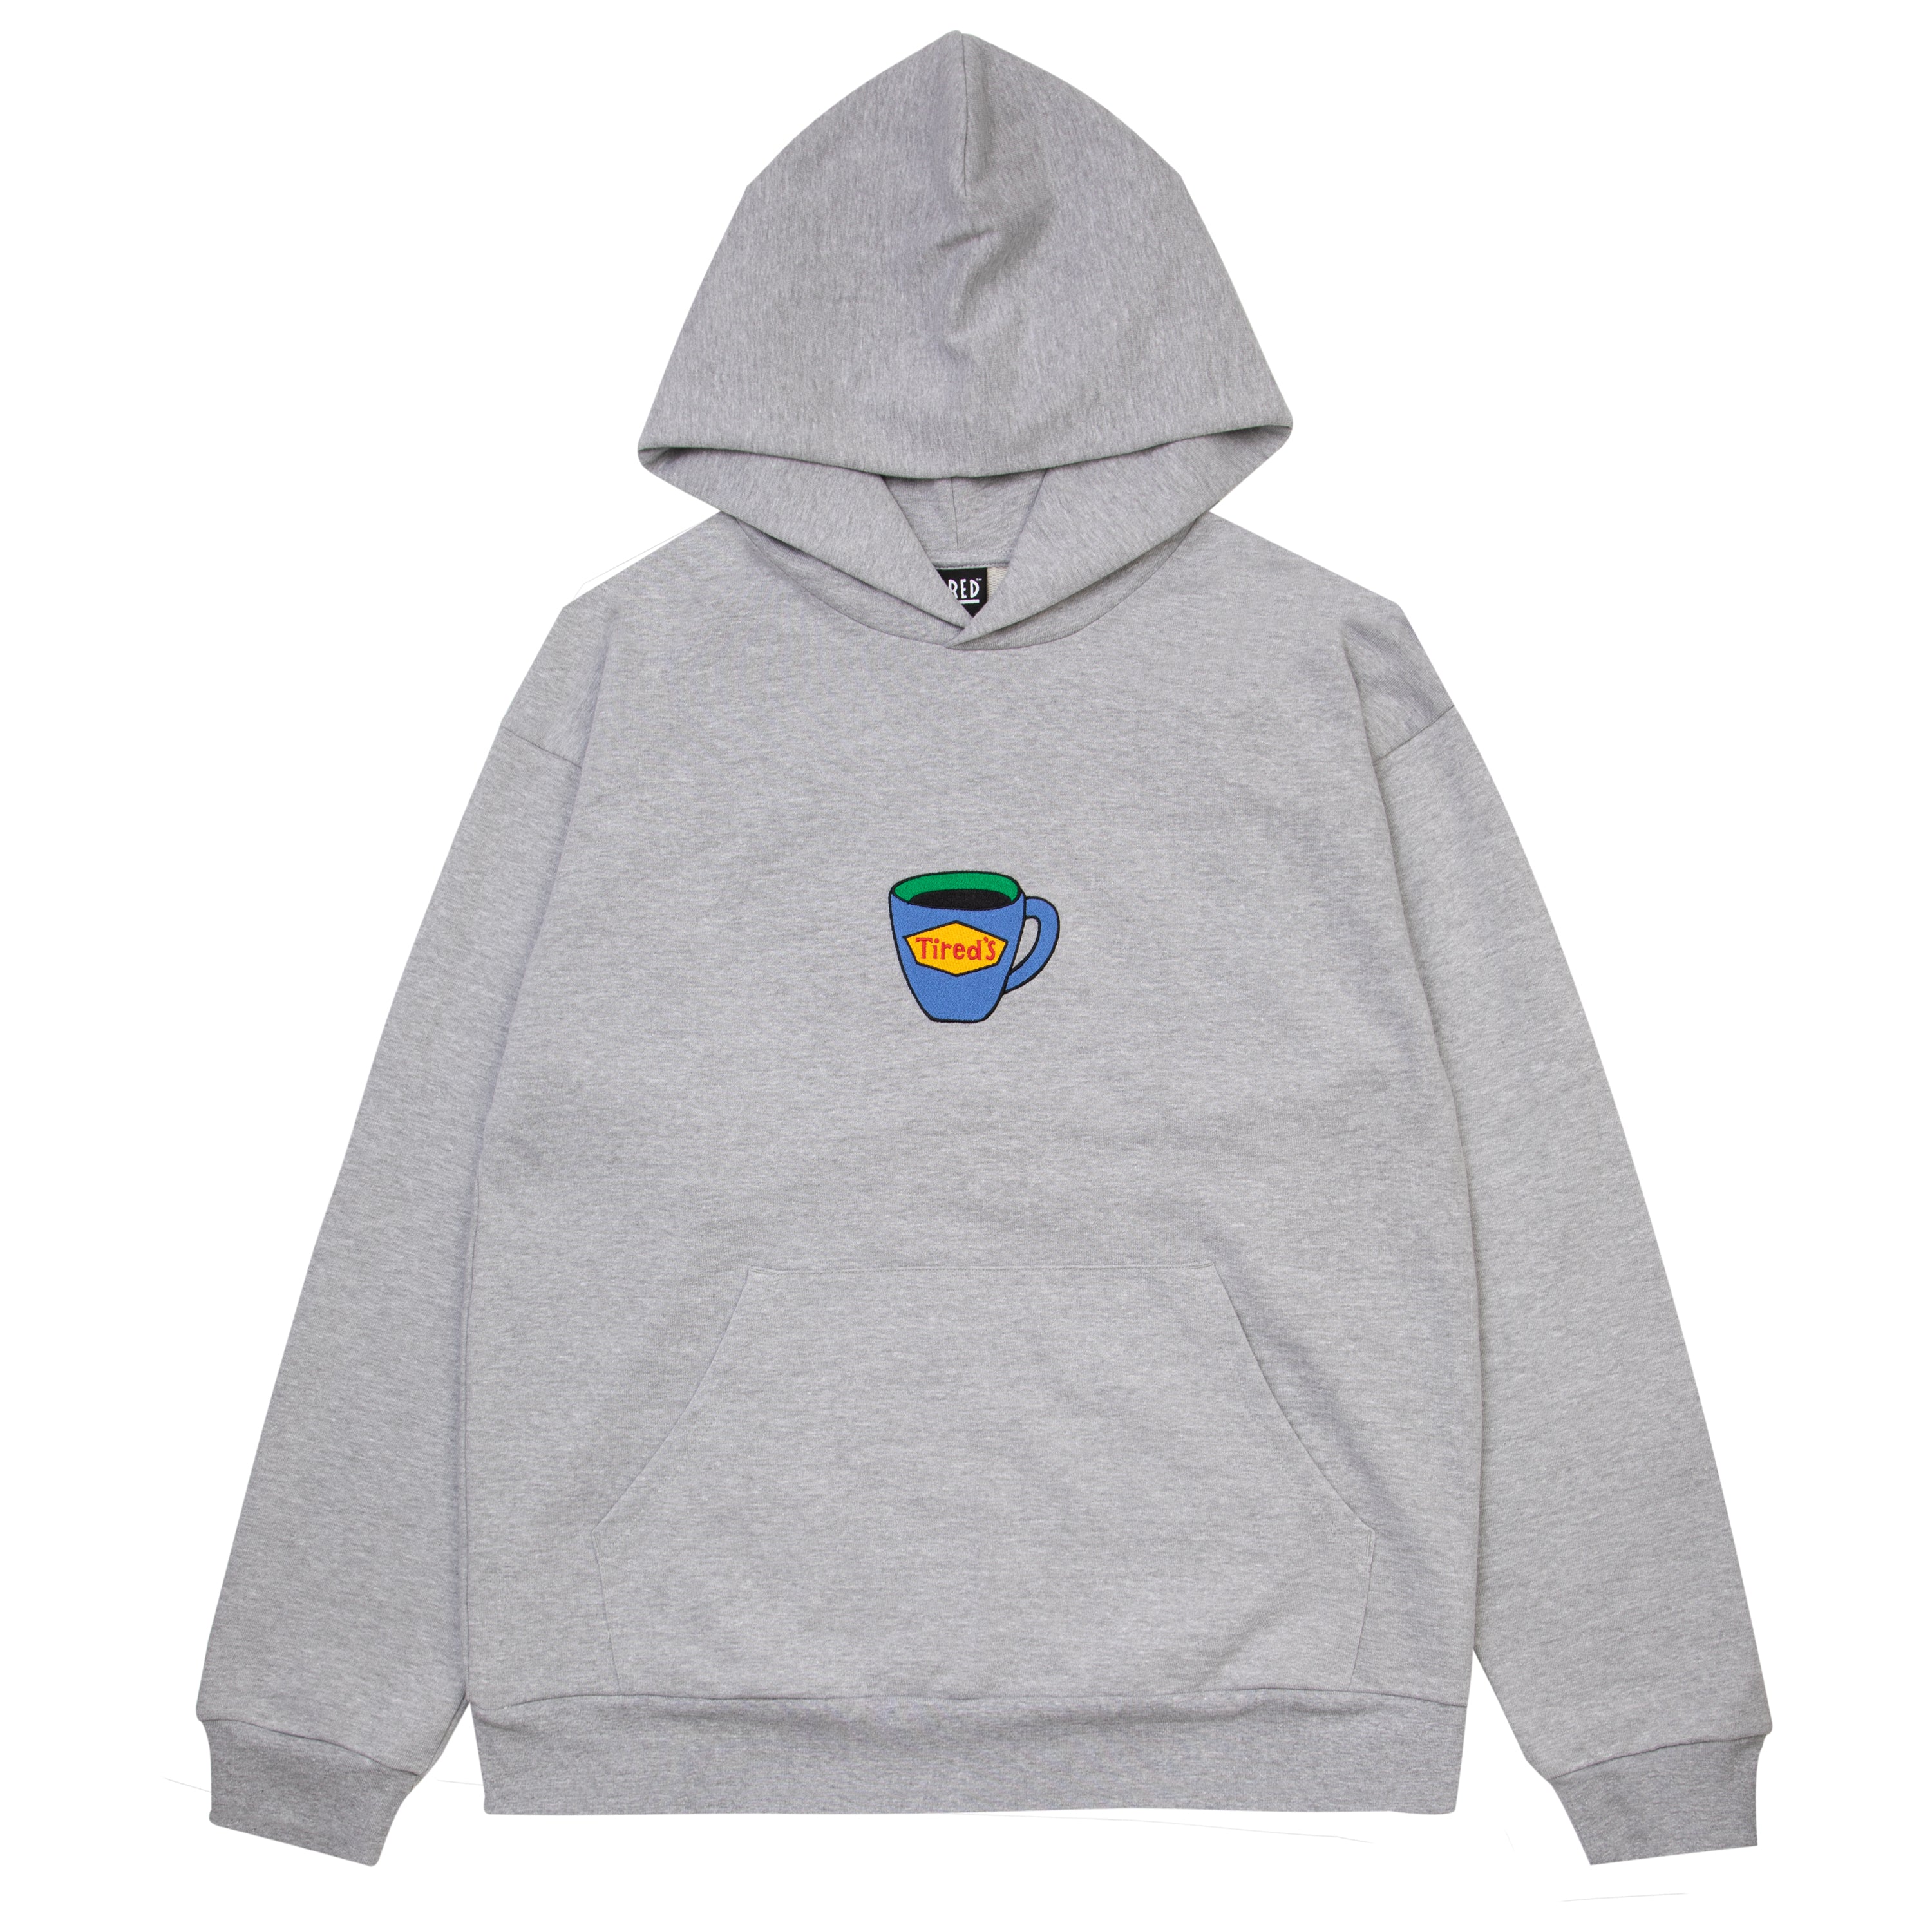 – GREY HEATHER HOODIE skateboards tired TIRED\'S